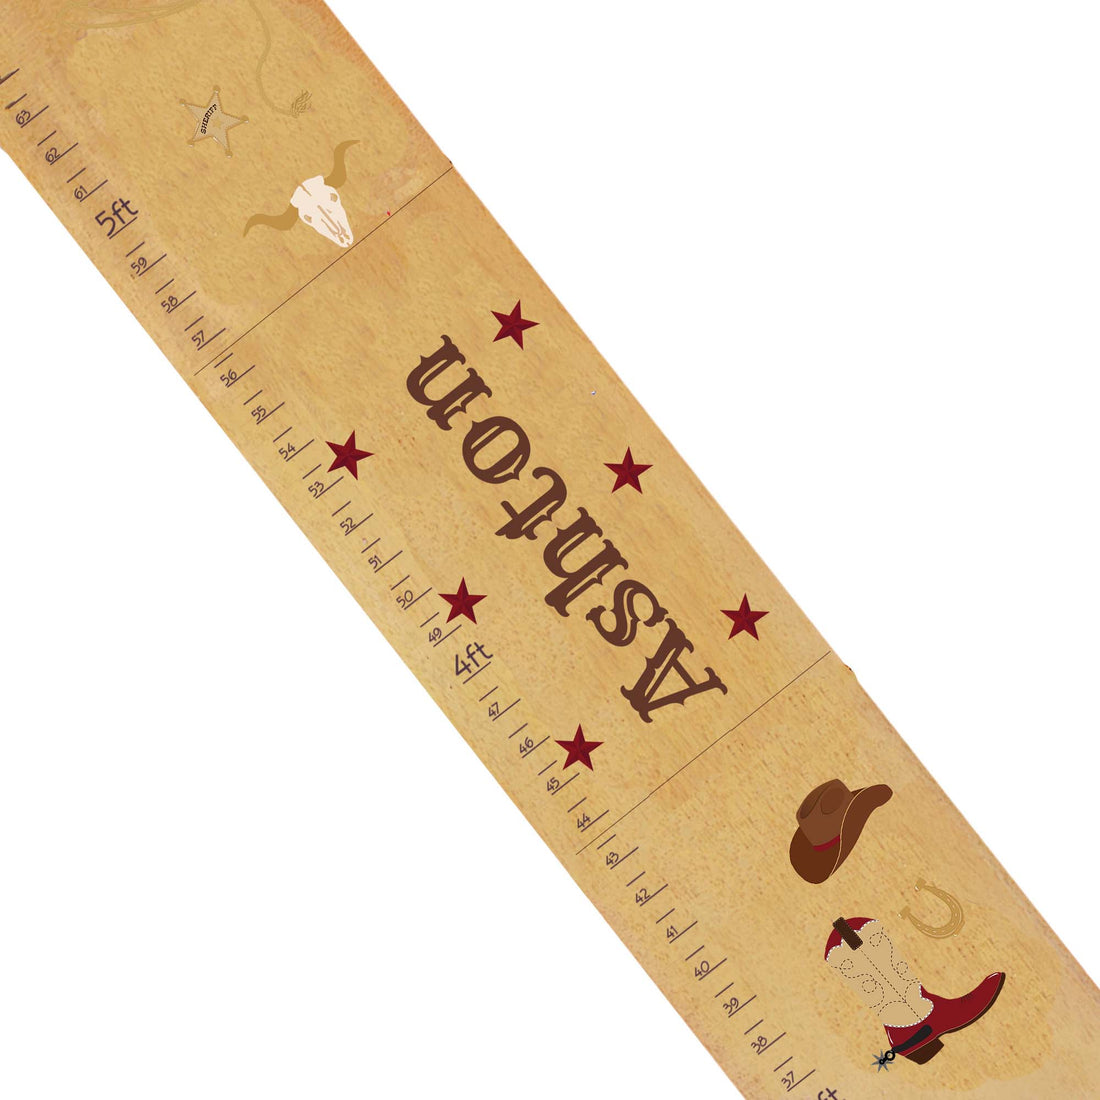 Personalized Natural Growth Chart With Wild West 2 Design